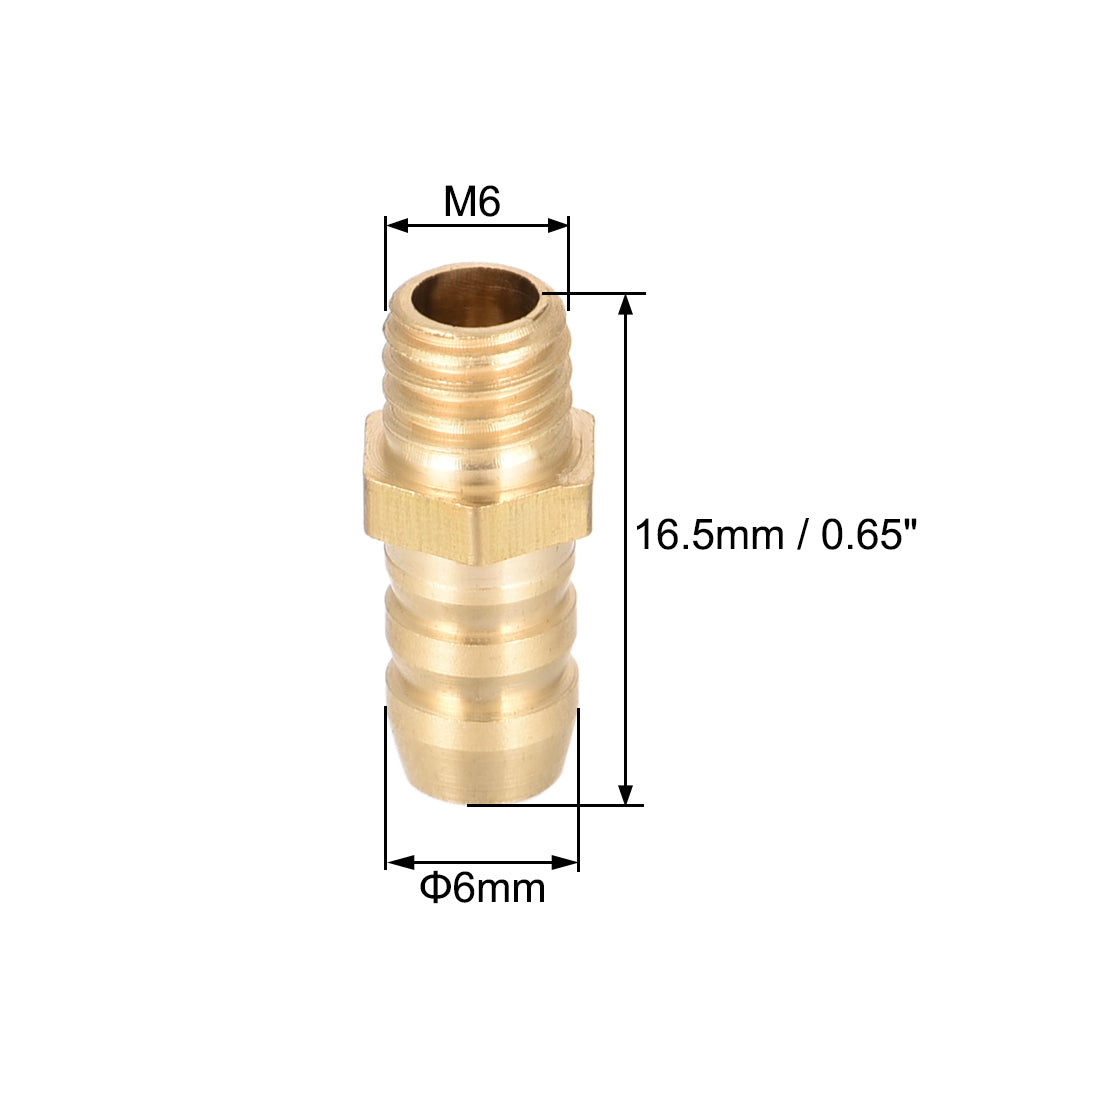 Uxcell Uxcell Brass Fitting Connector Metric M12-1.75 Male to Barb Fit Hose ID 8mm 2pcs